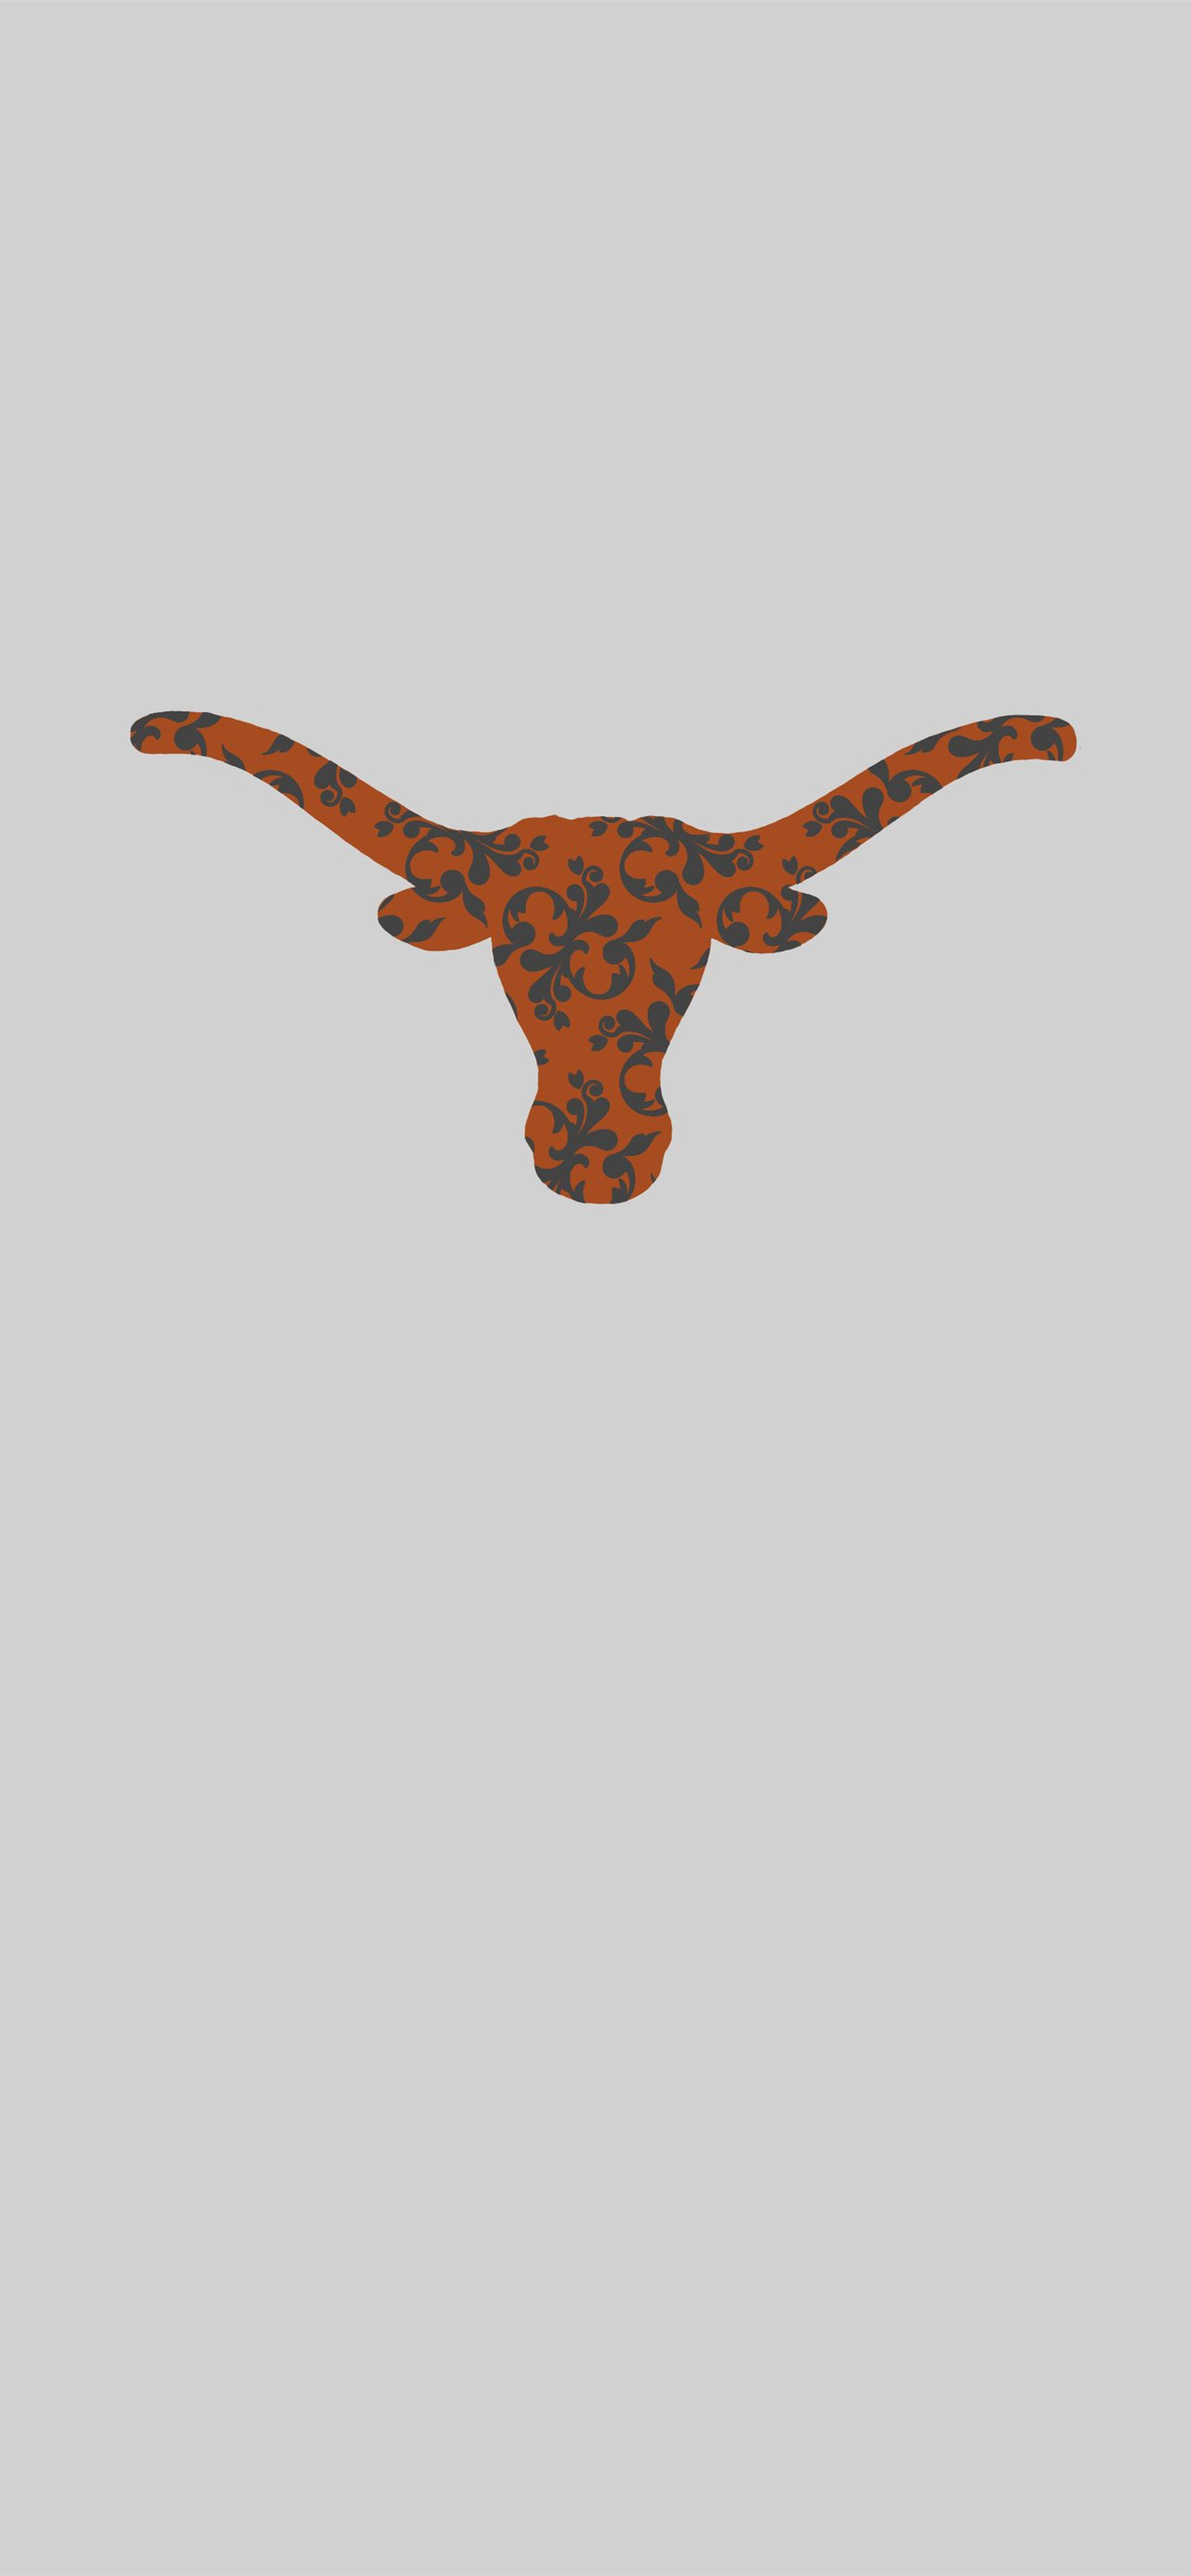 1284x2778 Best Texas iPhone HD Wallpapers